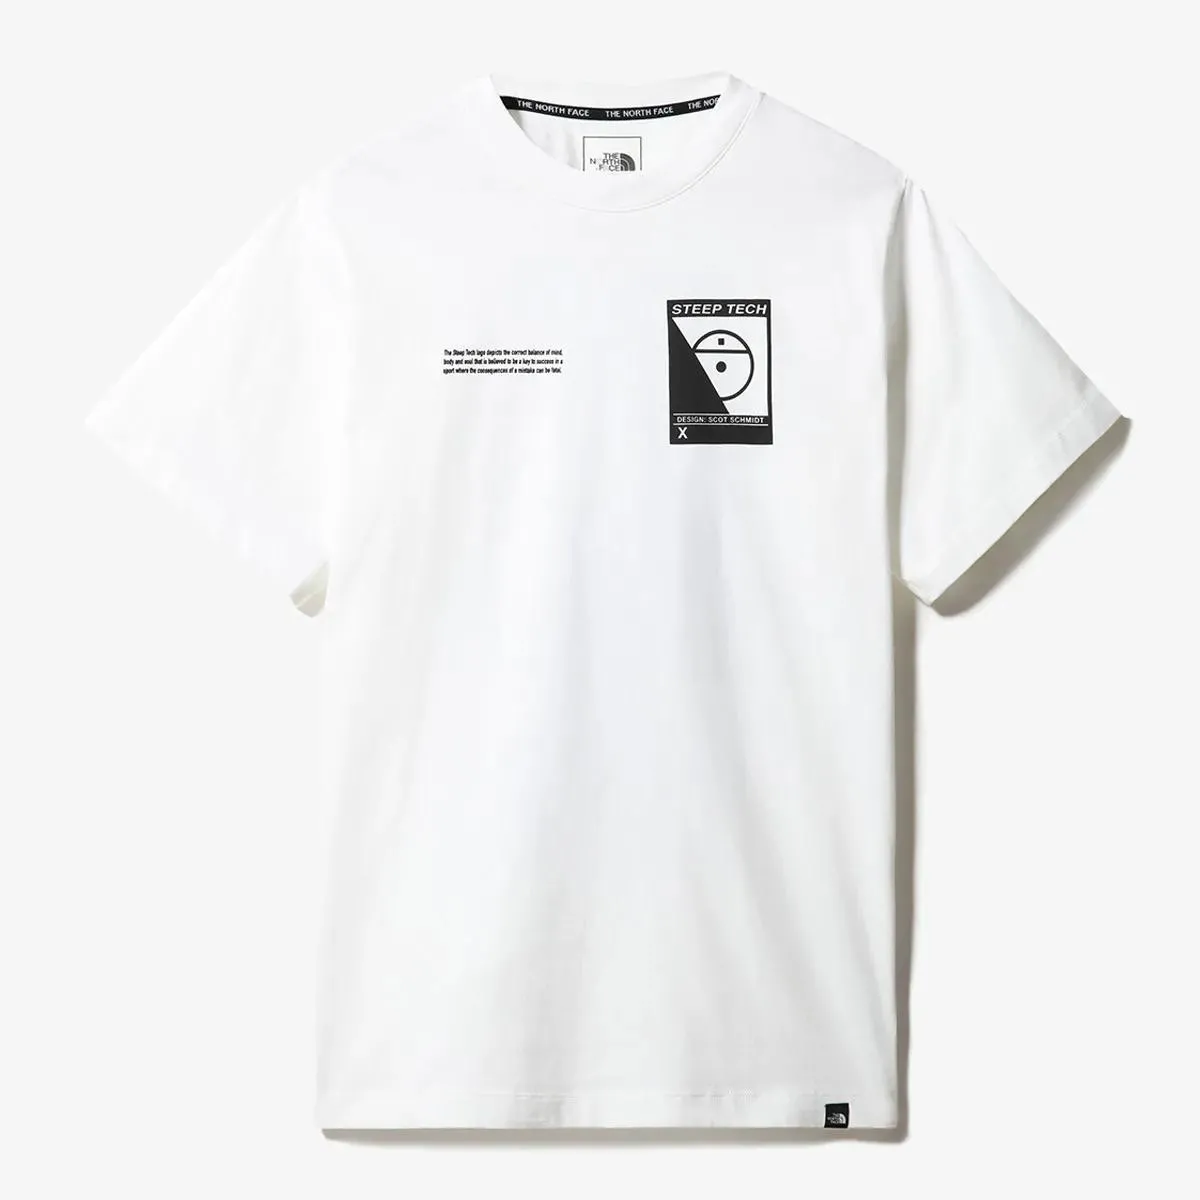 The North Face T-shirt S/S STEEP TECH TEE TNF WHITE 